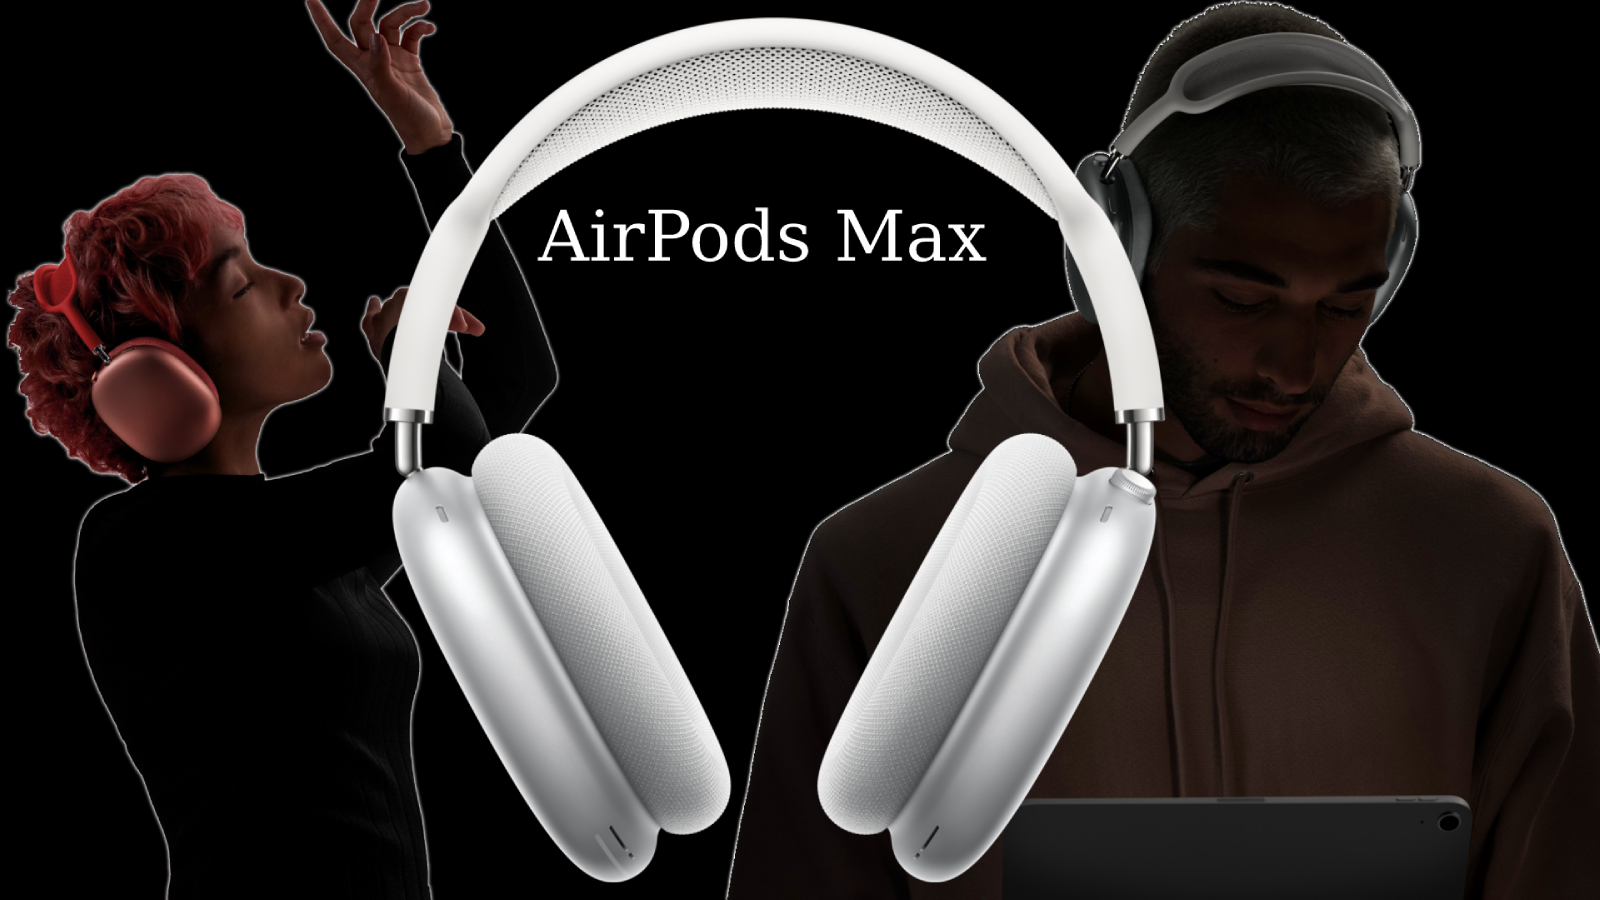 Well guys, I tried being part of the AirPod Max family with a good